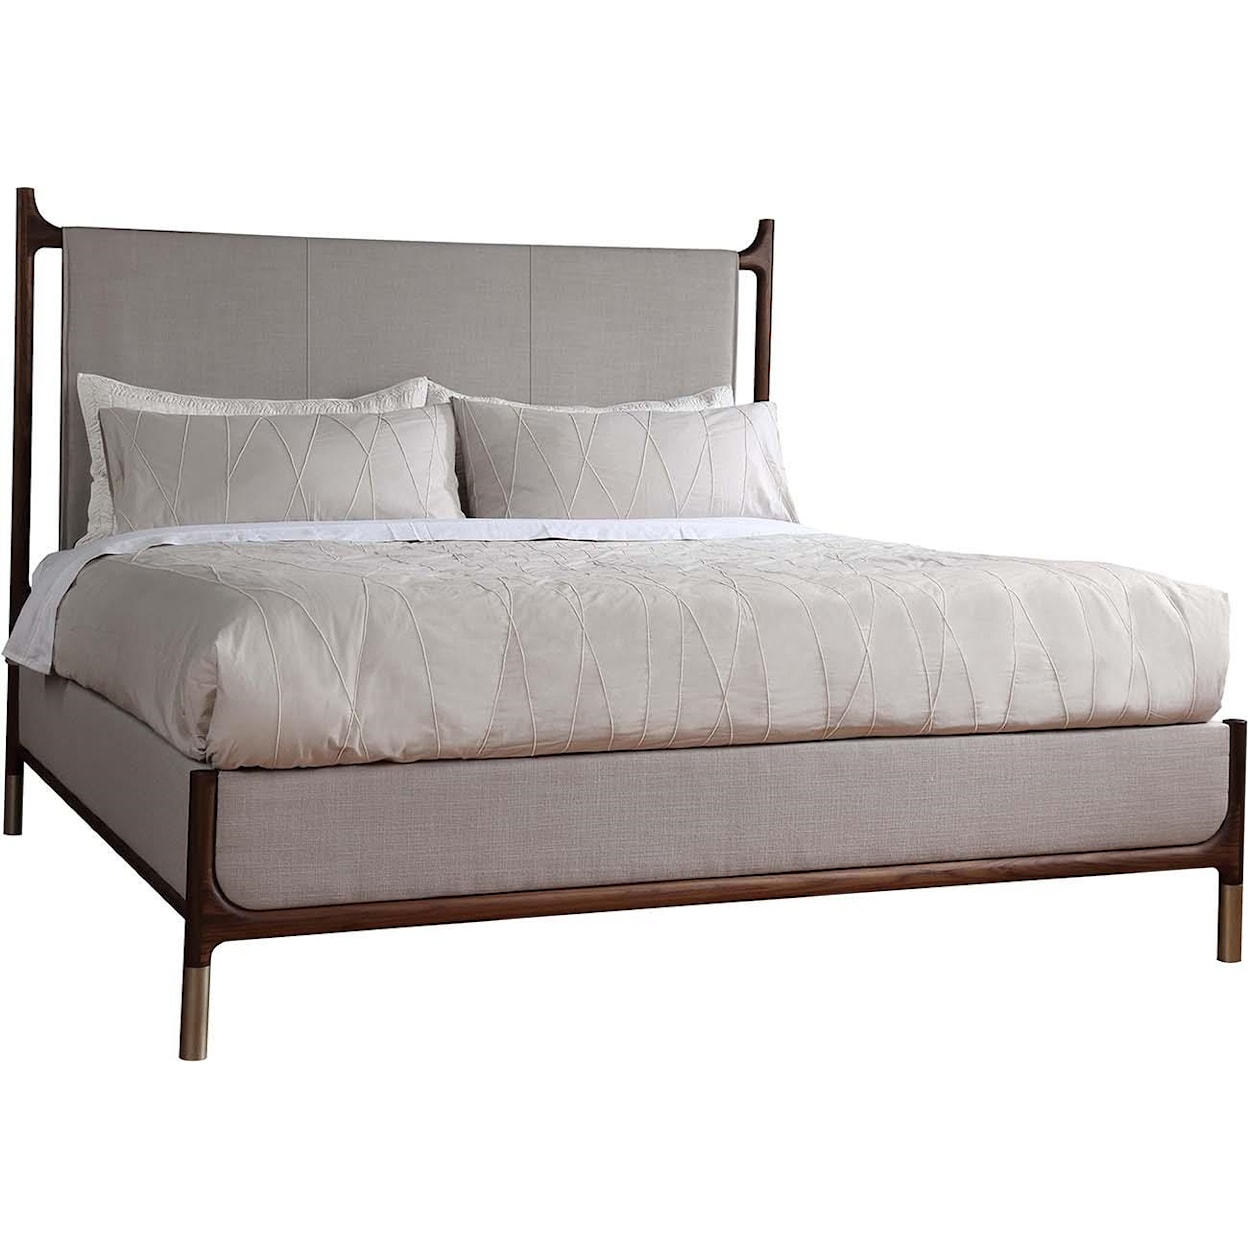 Stickley Walnut Grove California King Leather Upholstered Bed